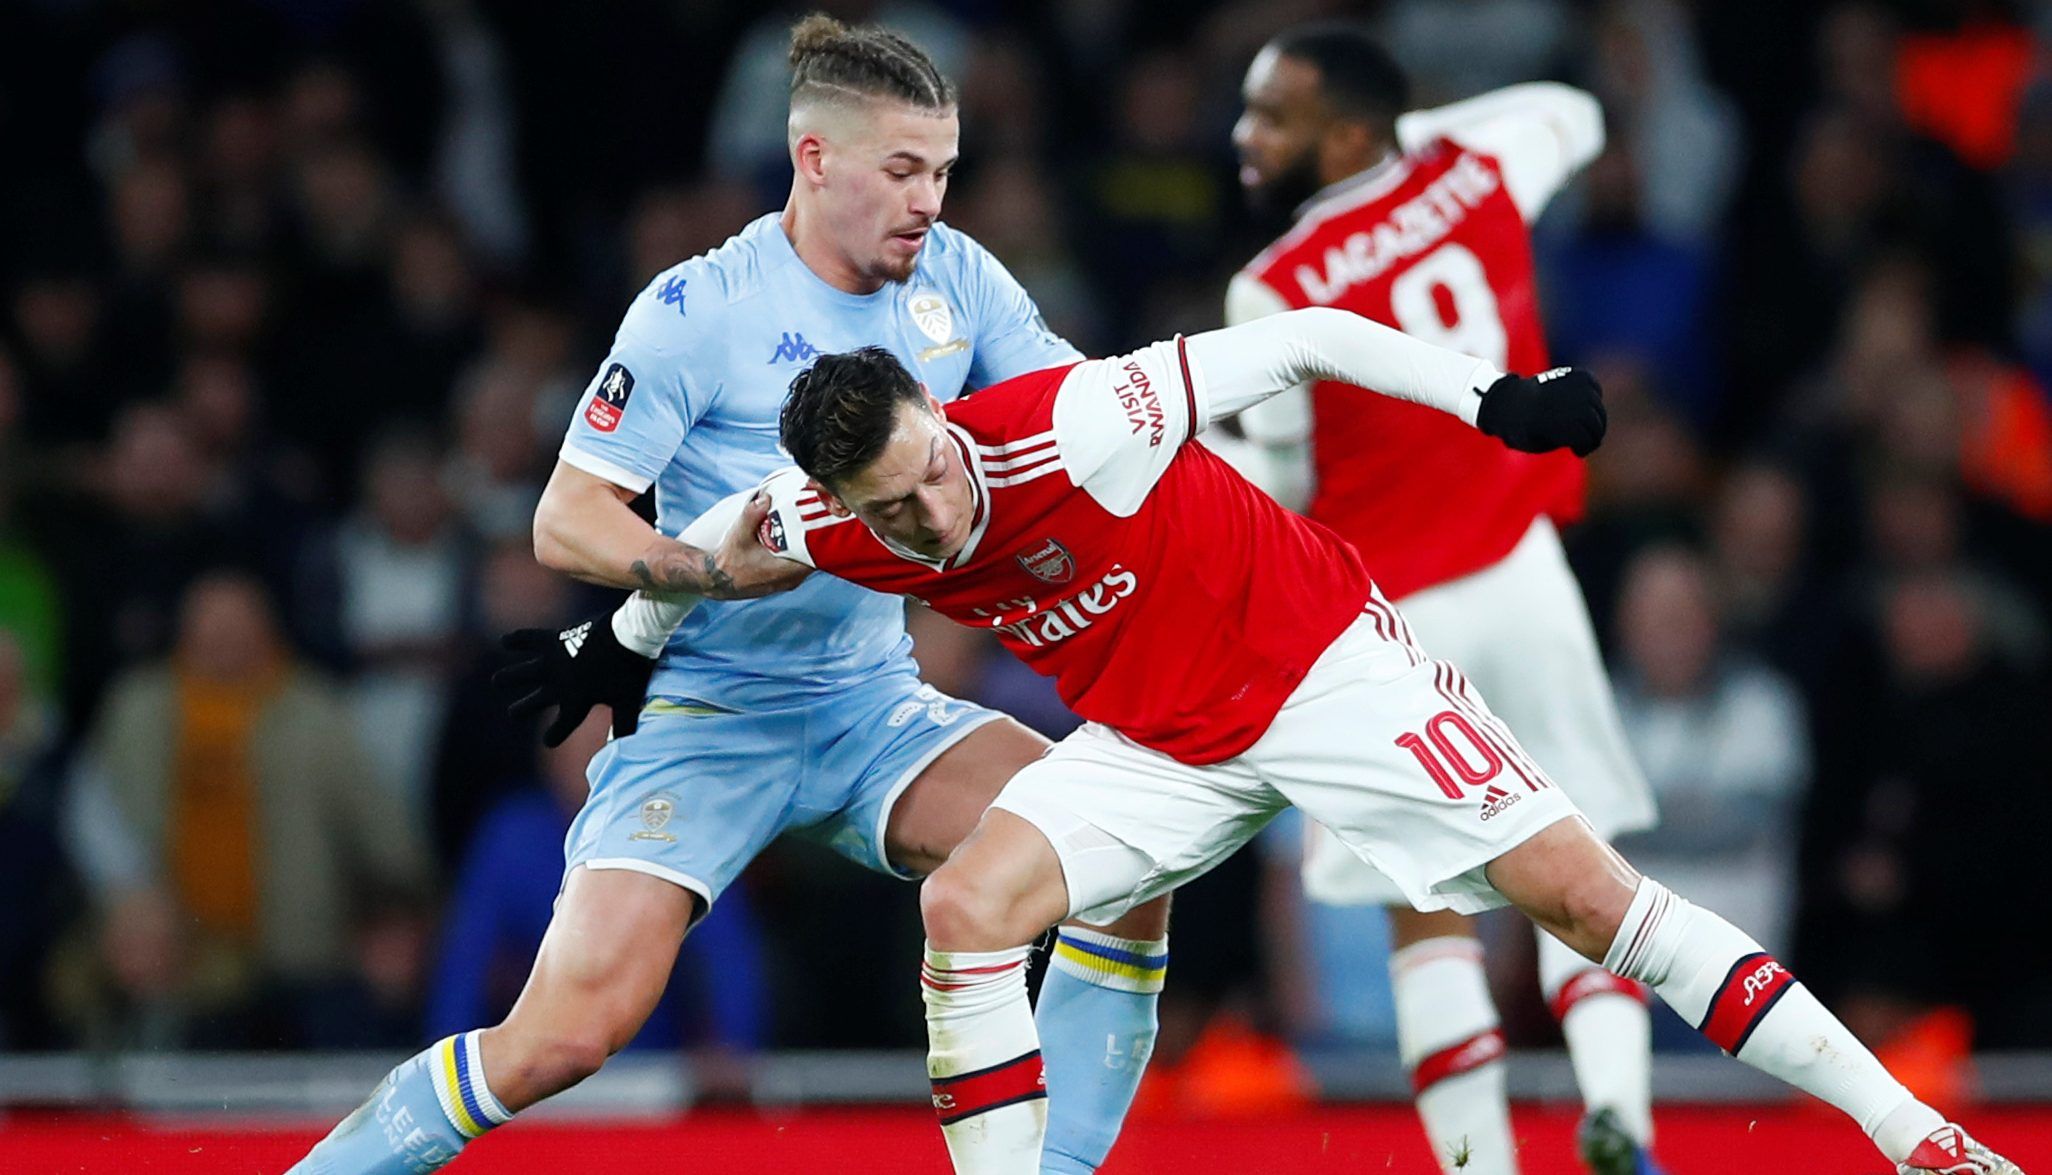 Soccer Football - FA Cup - Third Round - Arsenal v Leeds United - Emirates Stadium, London, Britain - January 6, 2020   Arsenal's Mesut Ozil in action with Leeds United's Kalvin Phillips   REUTERS/Eddie Keogh